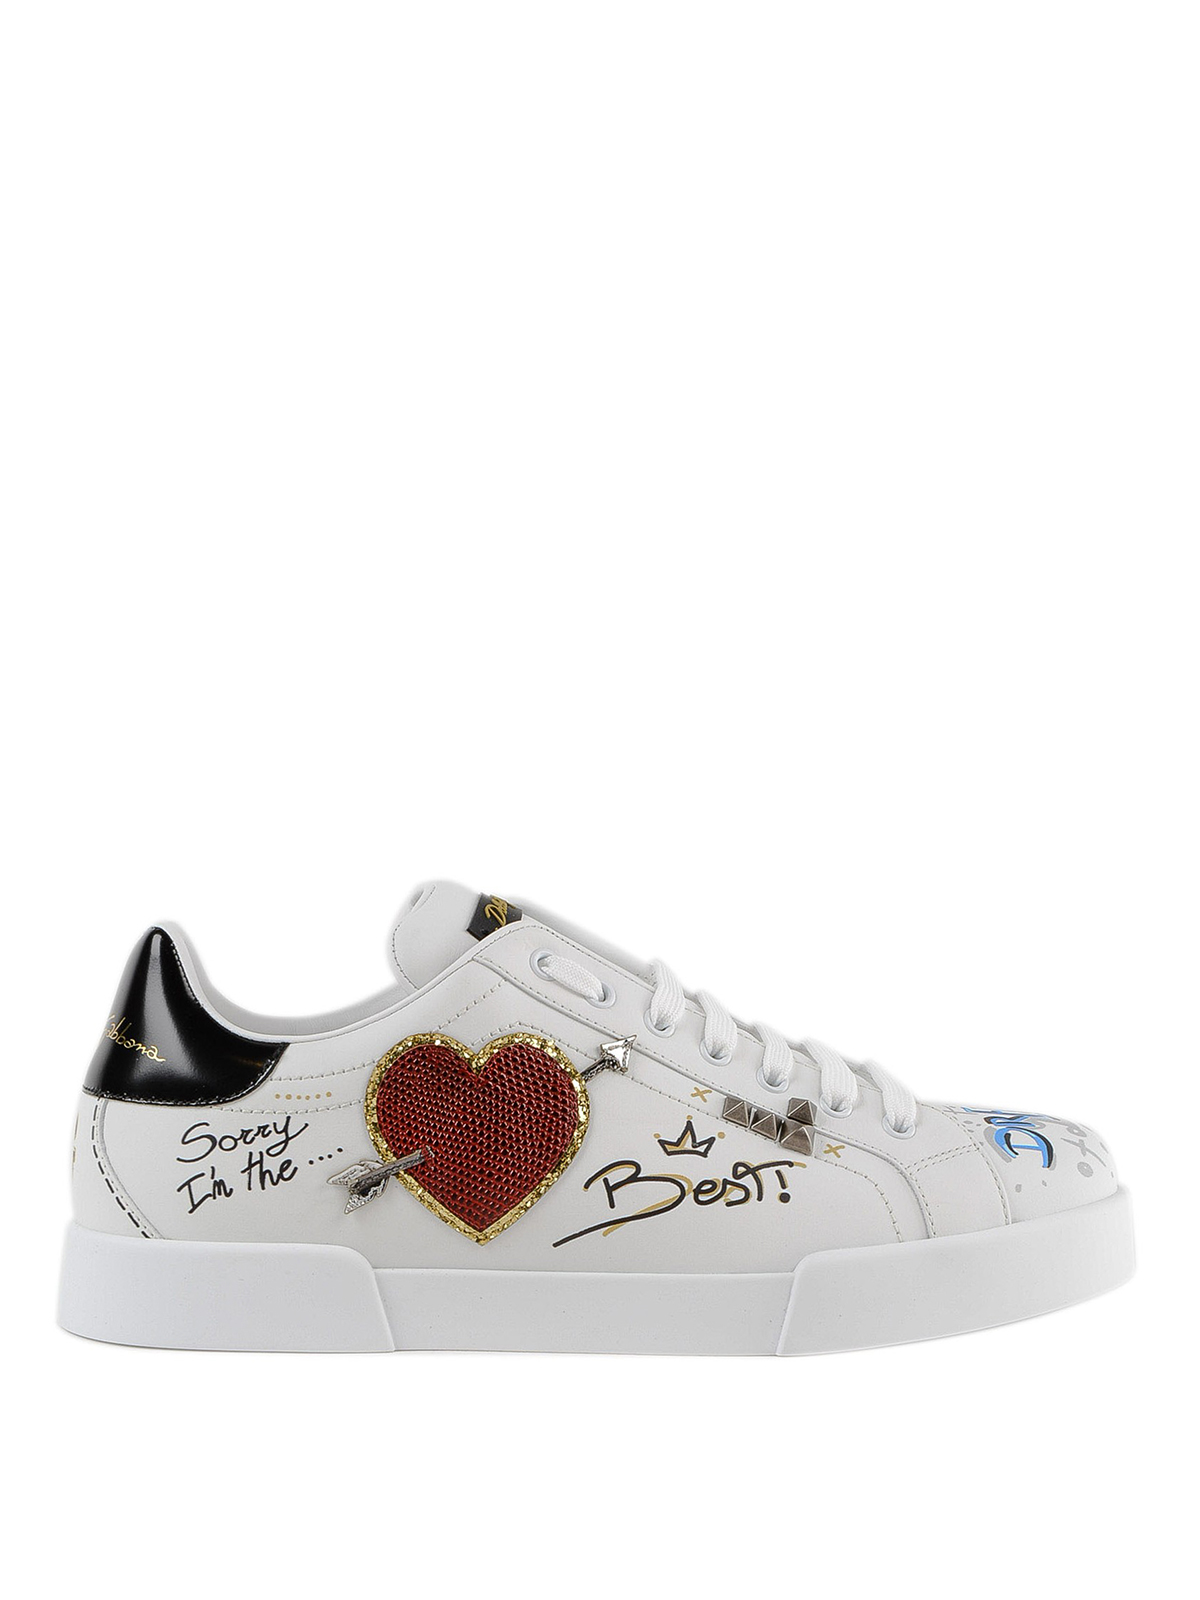 dolce and gabbana heart shoes